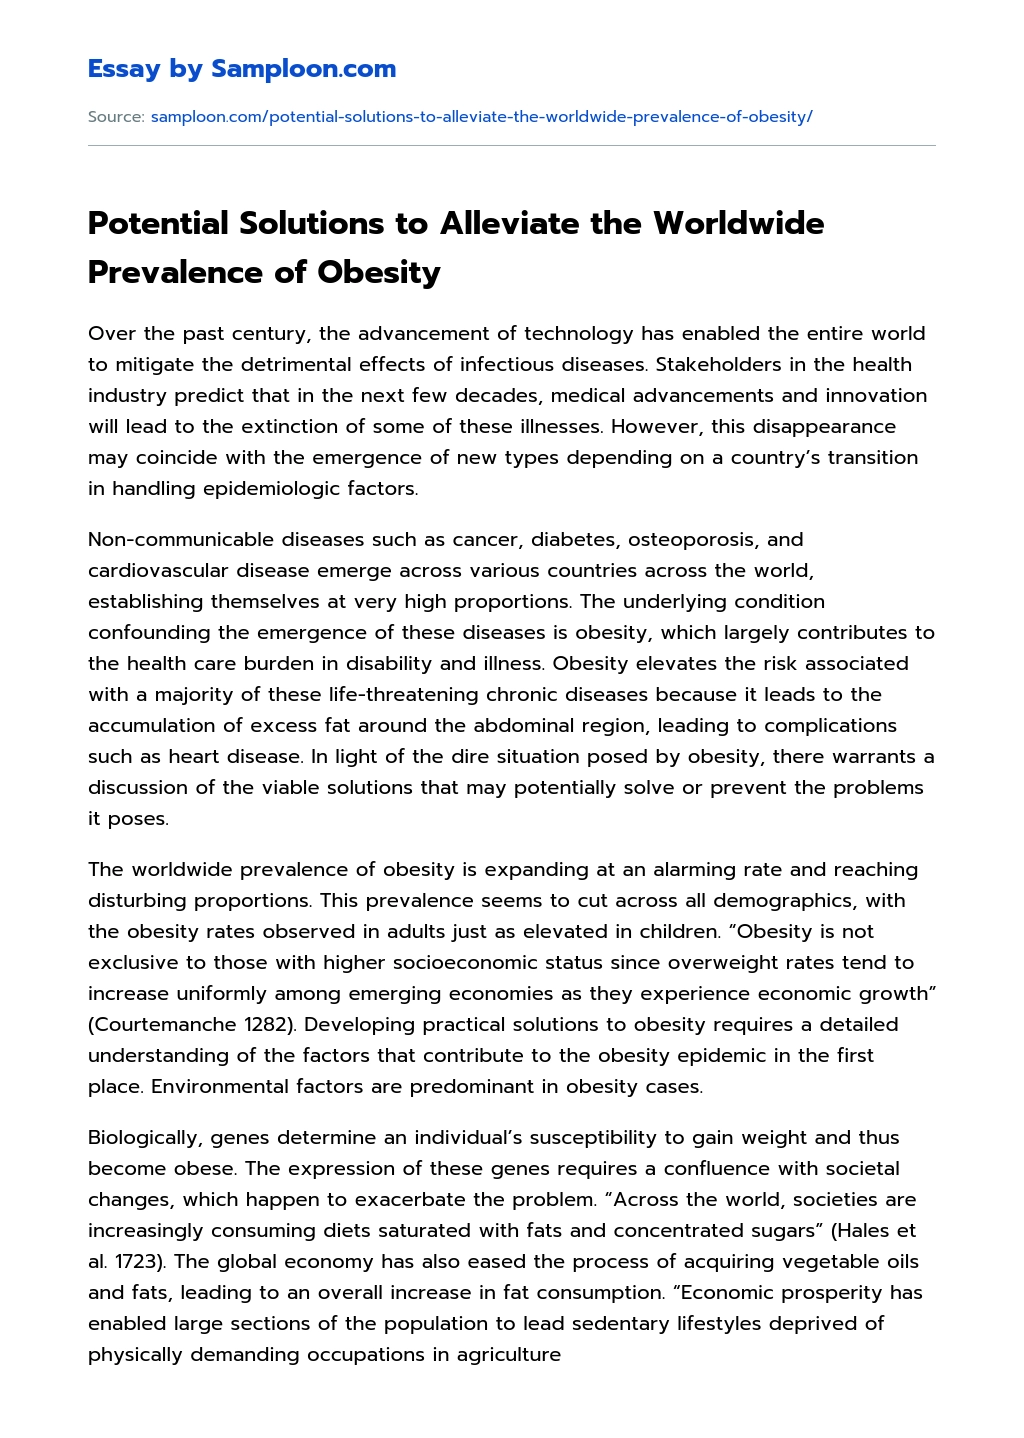 Potential Solutions to Alleviate the Worldwide Prevalence of Obesity essay